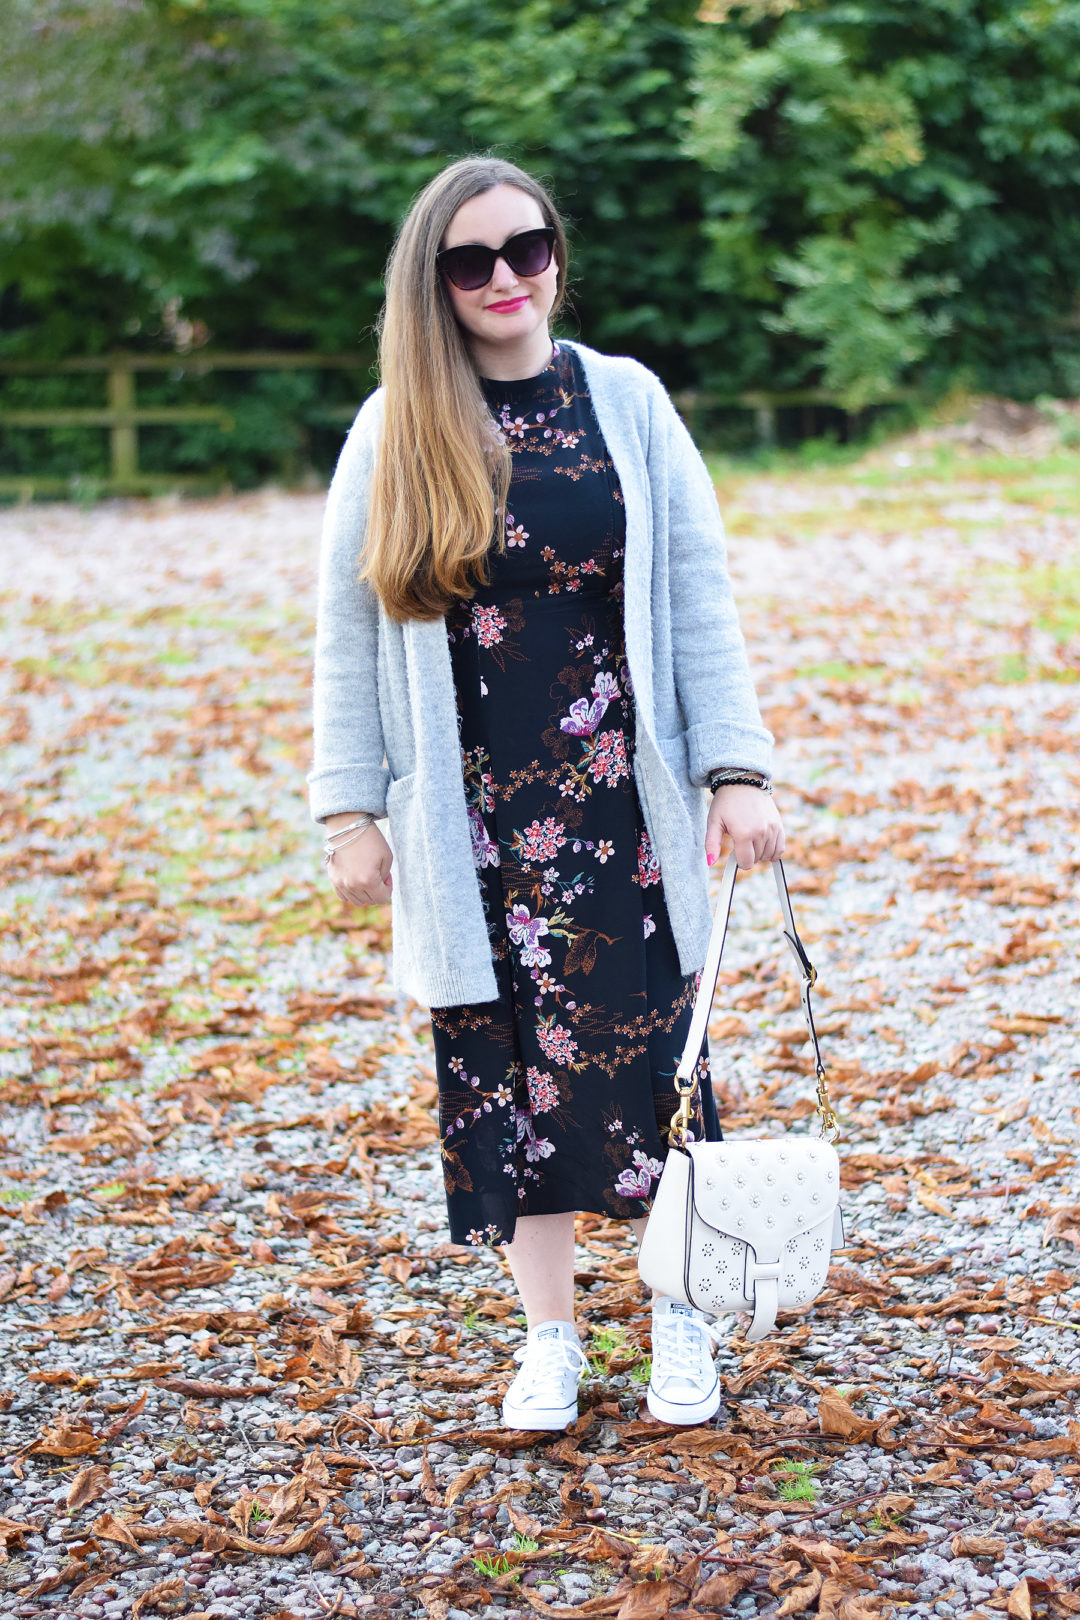 Black floral dress with grey cardigan and sneakers and coach x rodarte bag